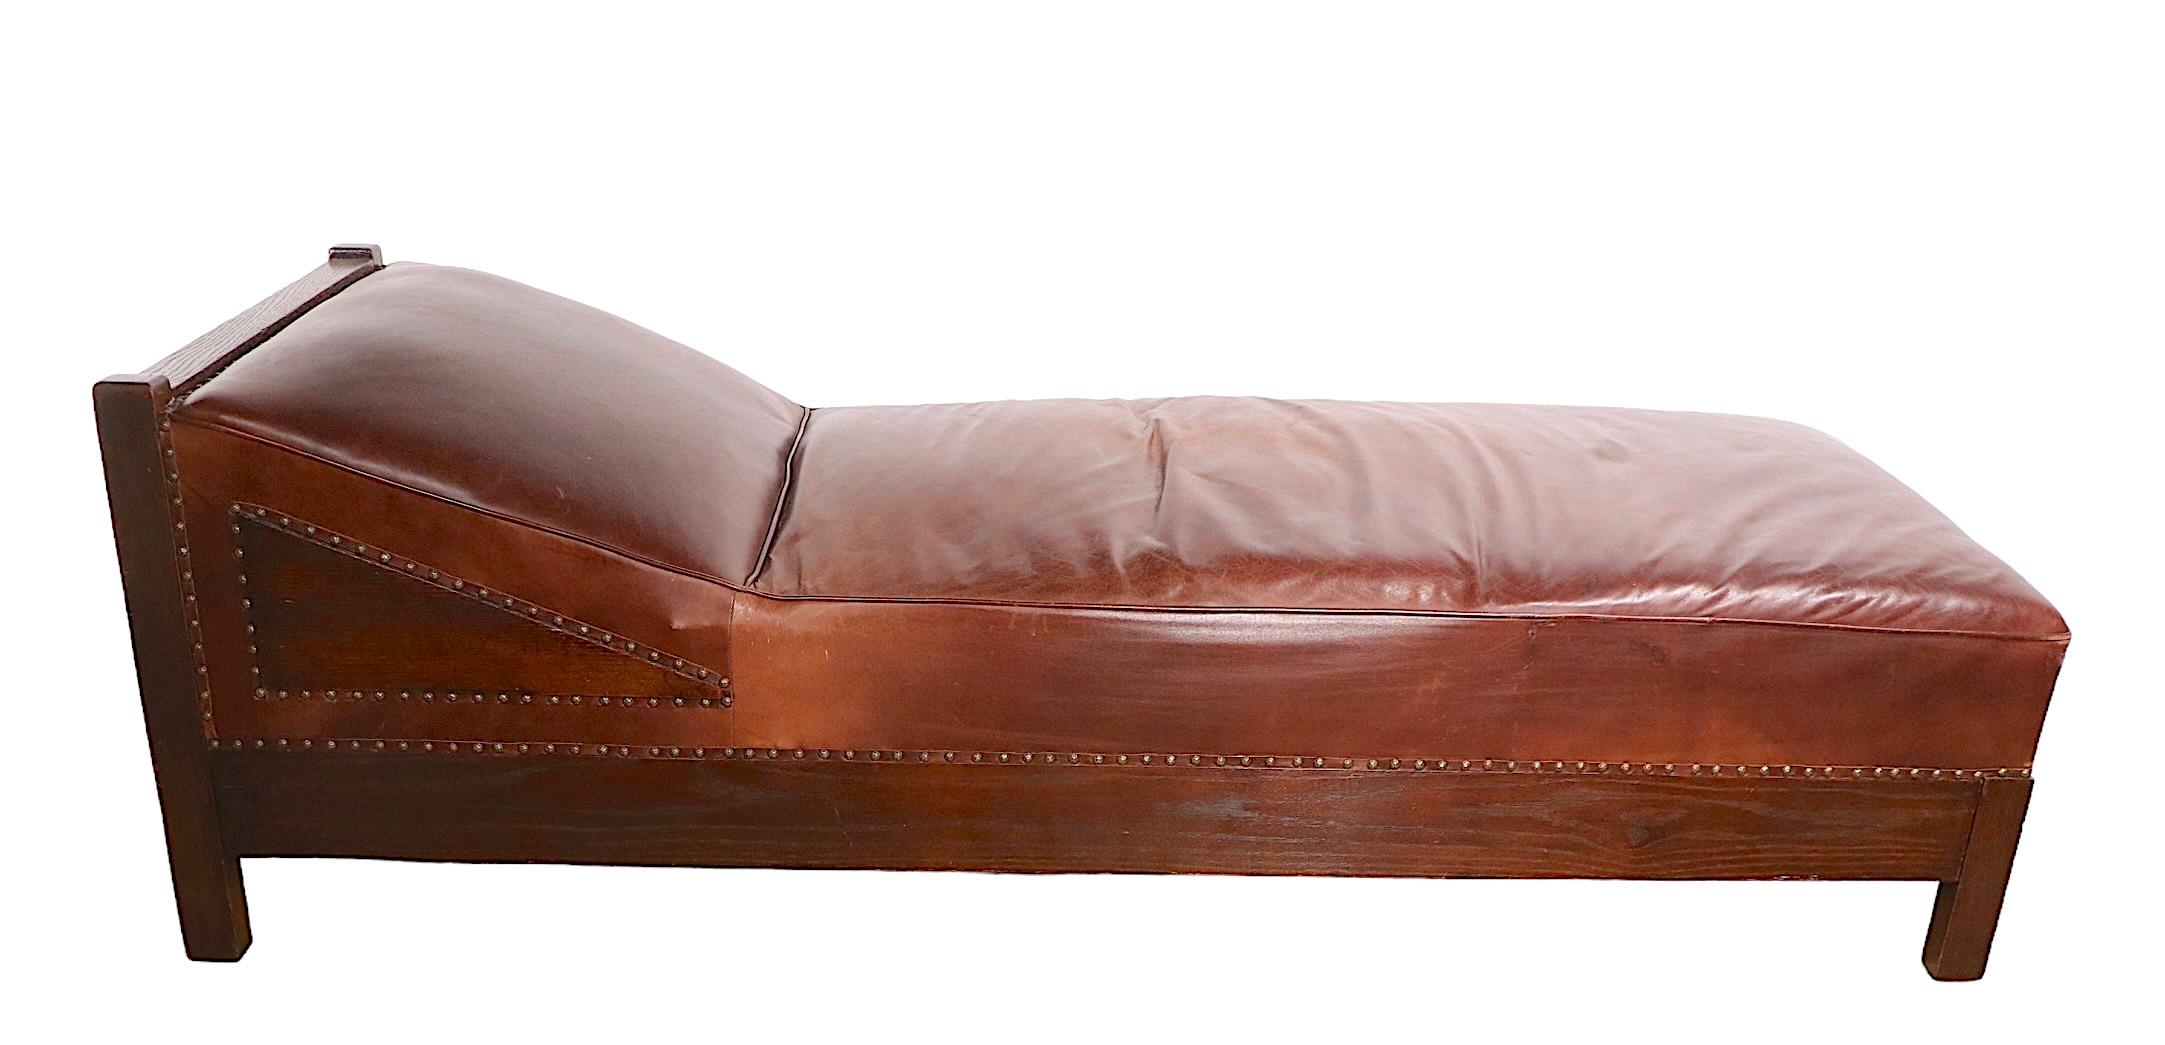 Oak and Leather Arts and Crafts Mission Daybed Chaise Lounge c. 1900 -1920's 5